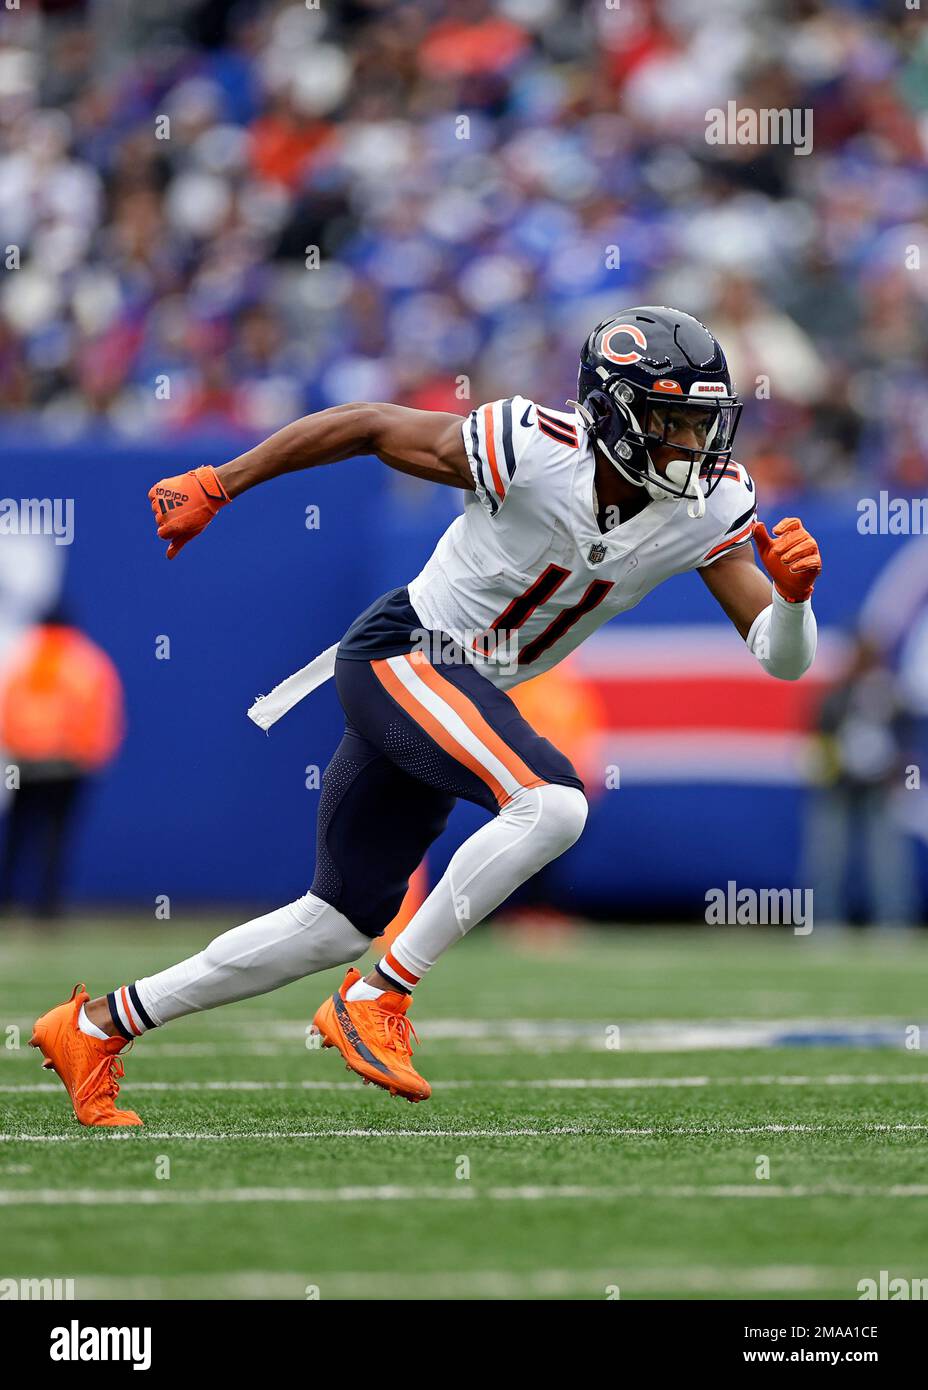 Chicago Bears wide receiver Darnell Mooney (11) runs against the